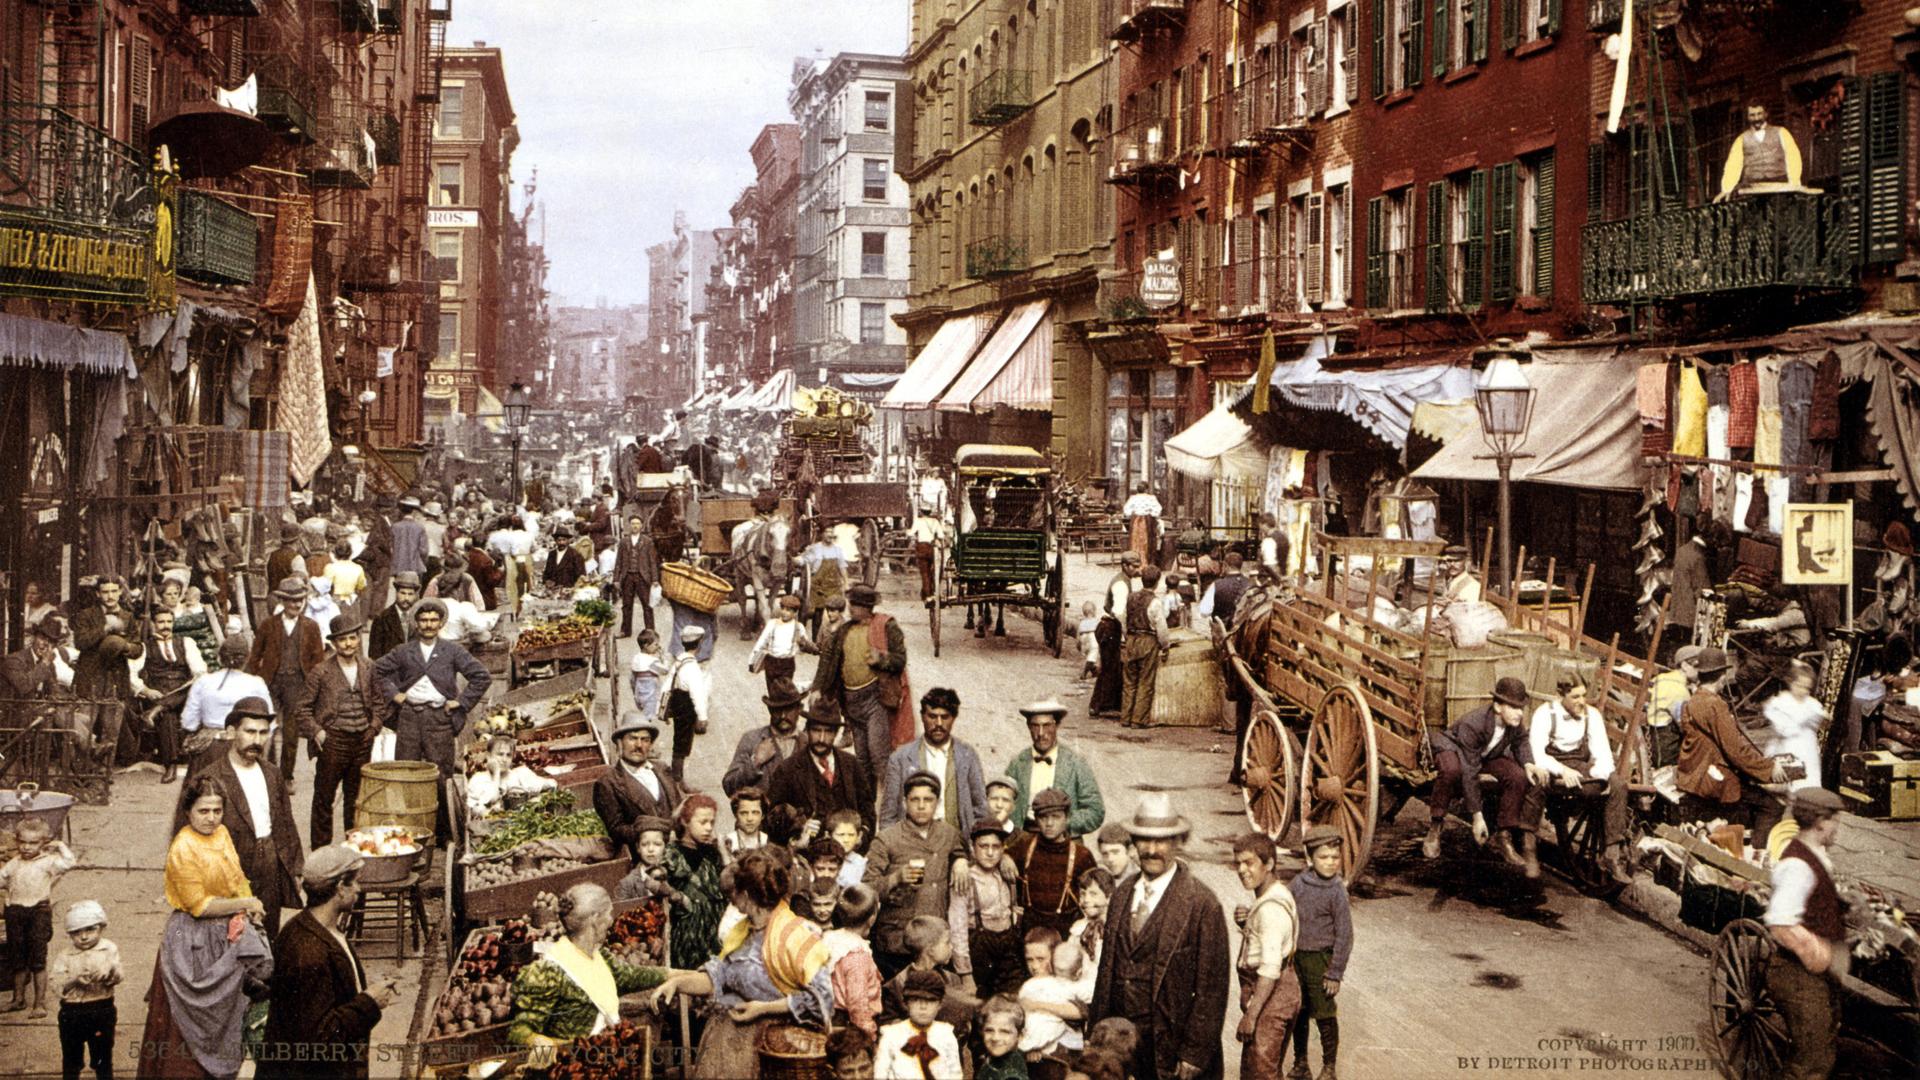 New York City's ‘Little Italy’. Mulberry Street, Lower East Side, circa 1900